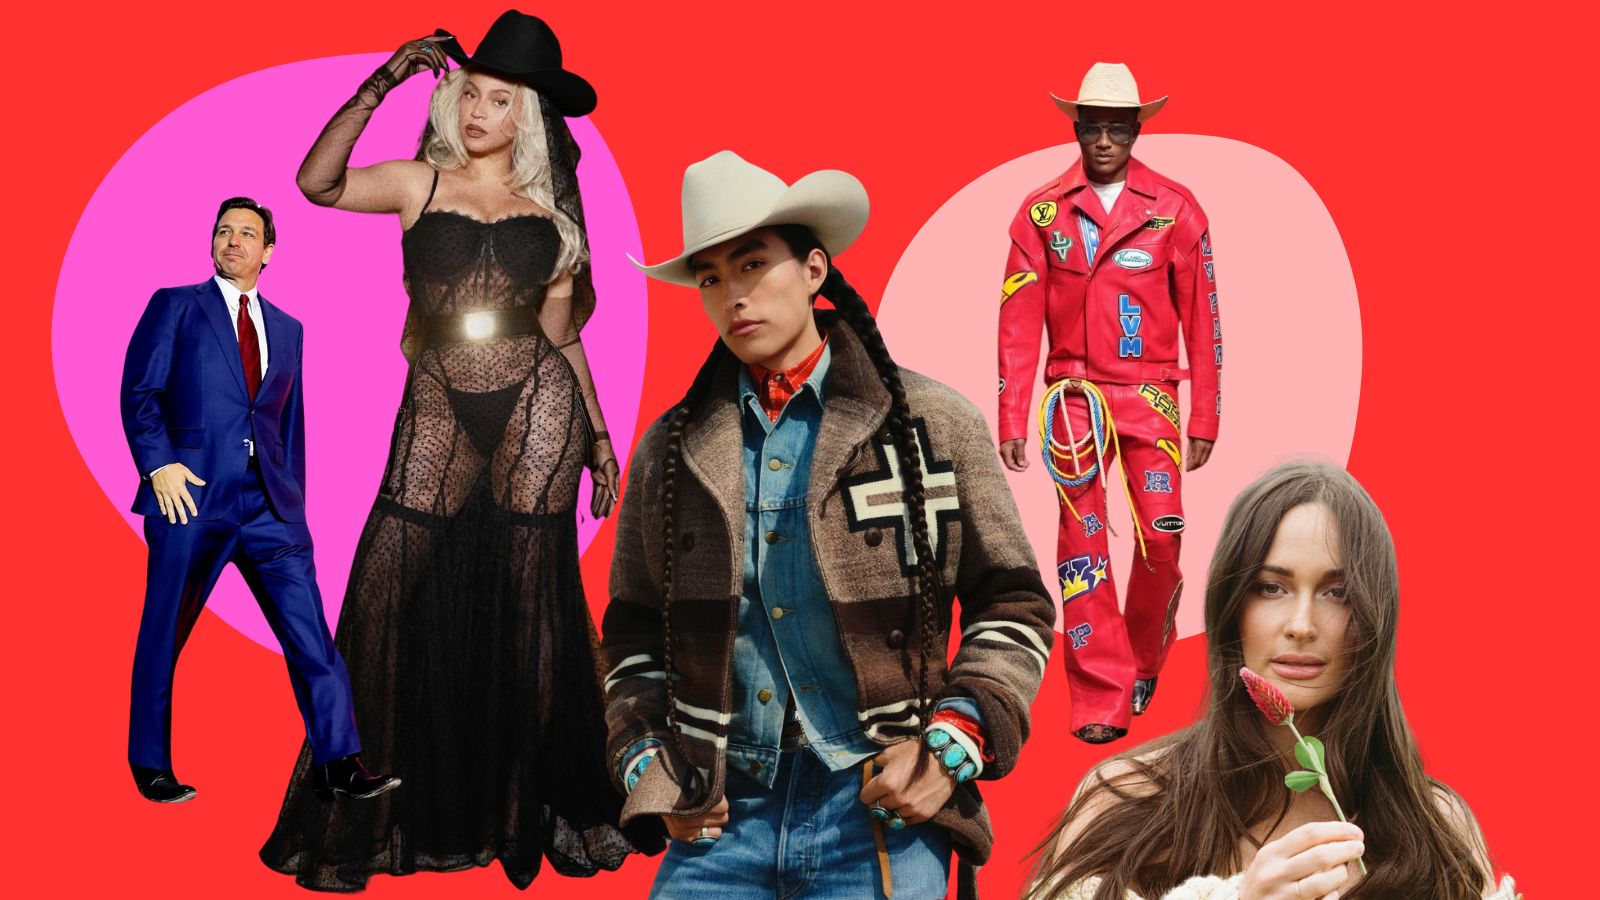 Yeehaw! Lil Nas X's Pink Cowboy Outfit at the Grammys Is Everything and  More